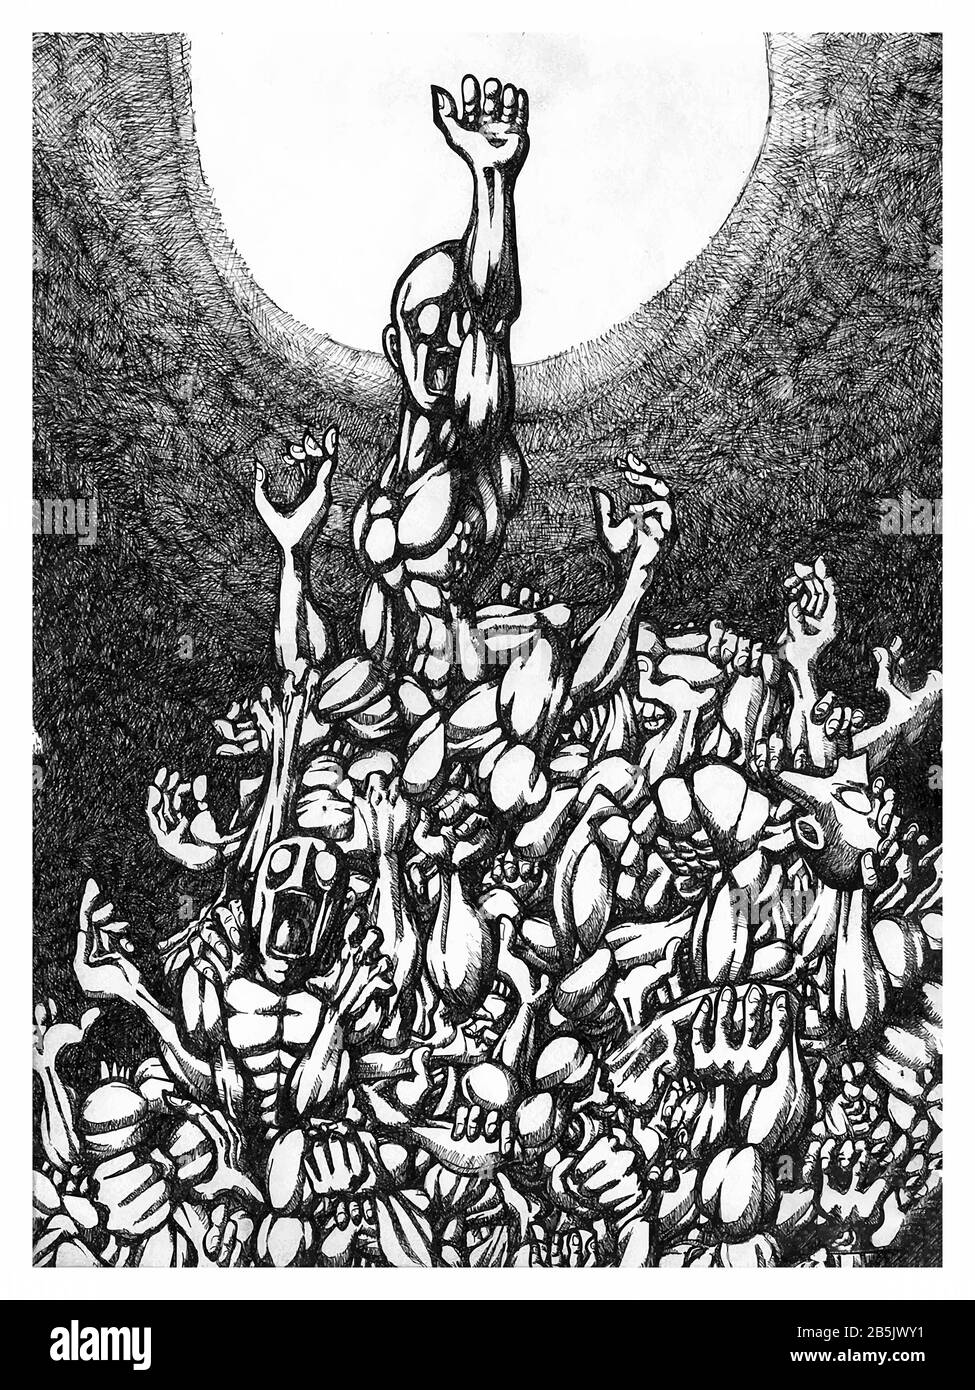 Ink Drawing (Hatch Work) of Crowd Trying to get Freedom in a Textured Unique Style. Artistic Manual Illustration. Pain, Agony, Depression, Anxiety. Stock Photo